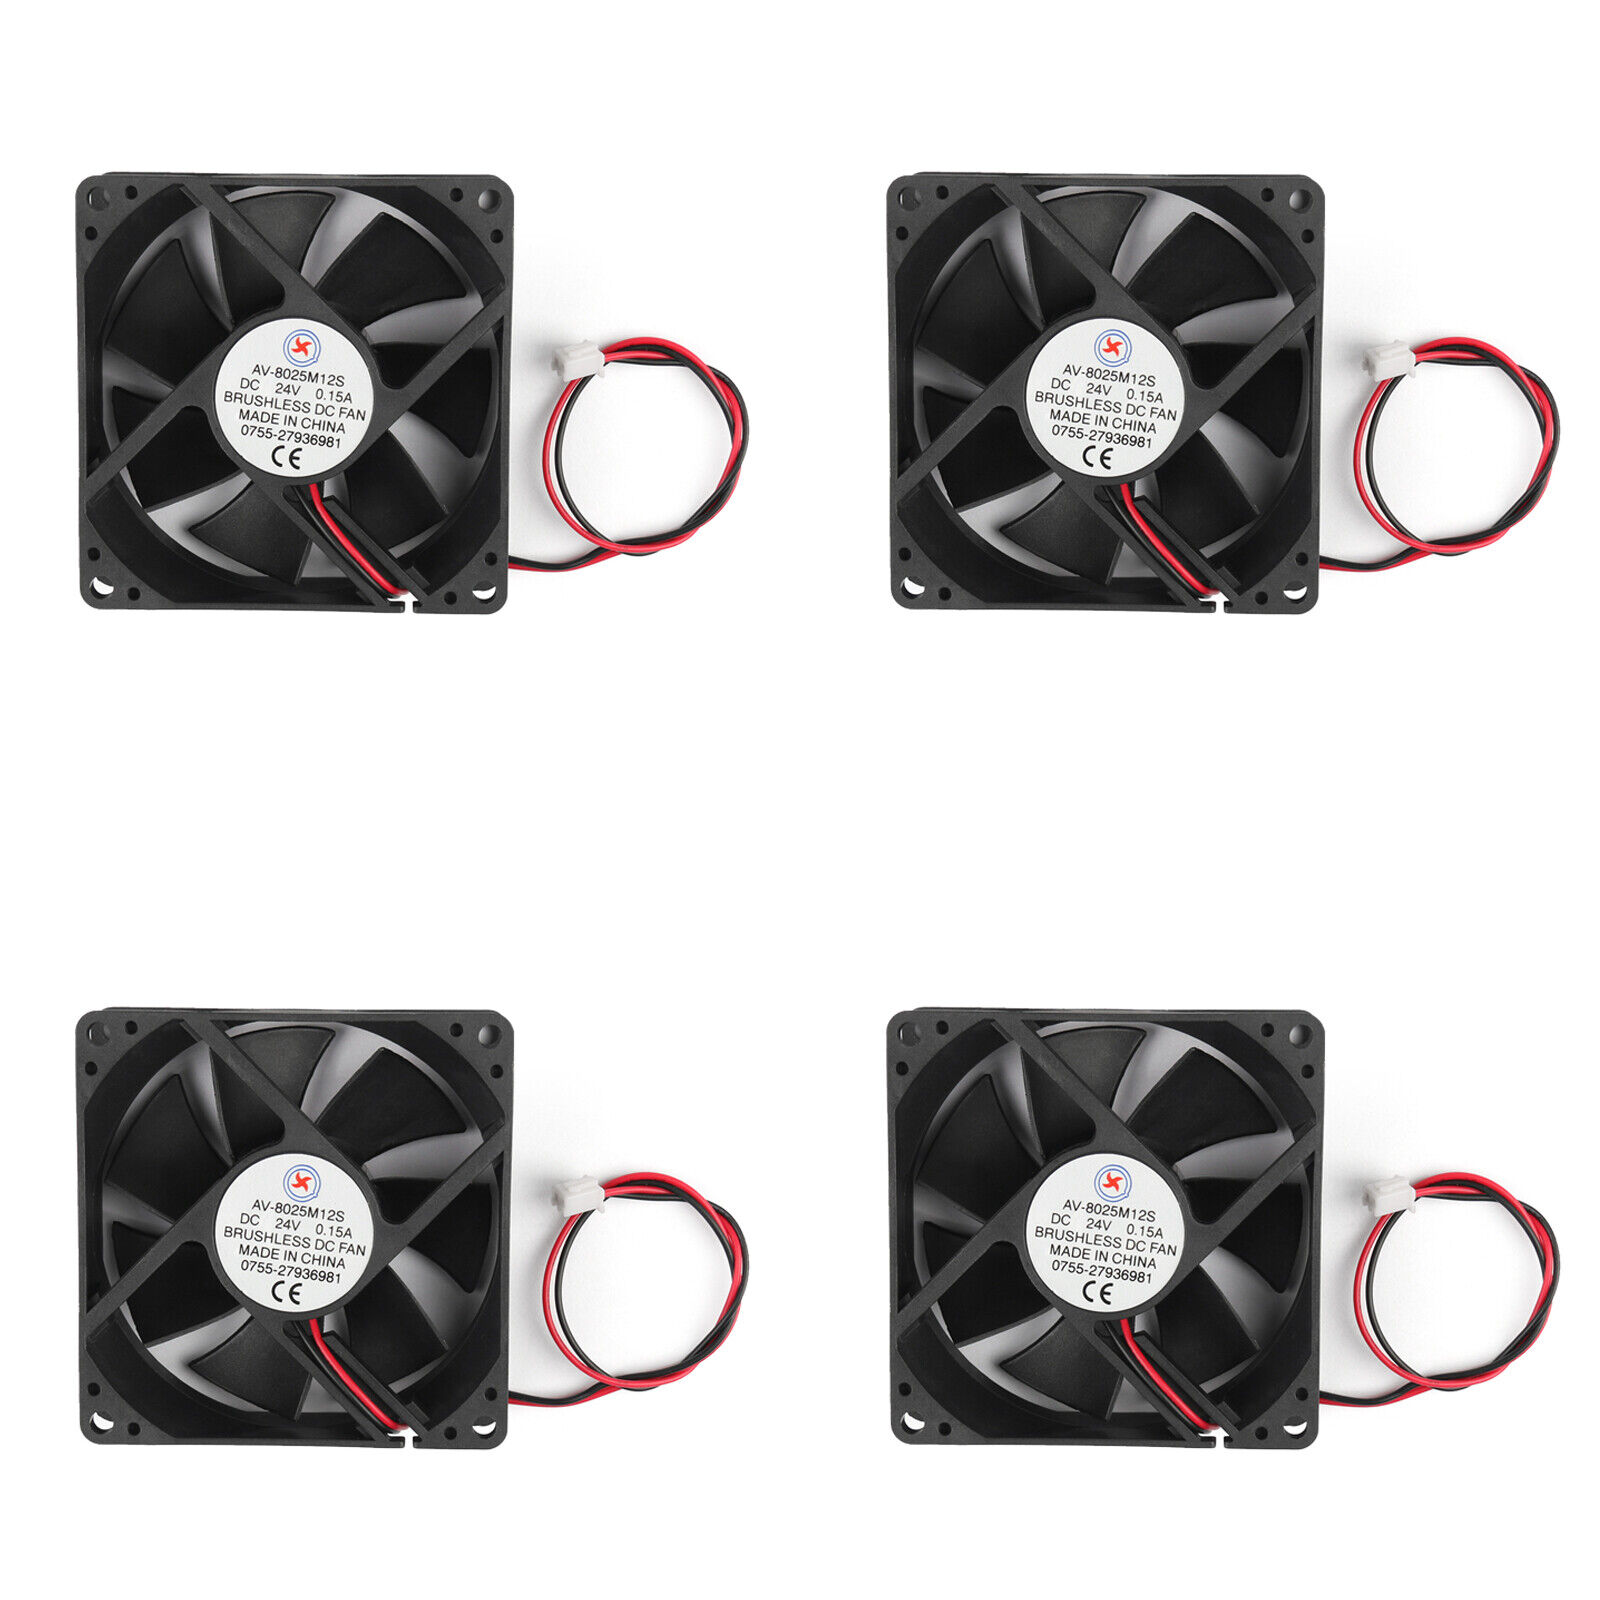 4Pcs DC Brushless Cooling PC Computer Fan 24V 8025s 80x80x25mm 0.15A 2 Pin Wire